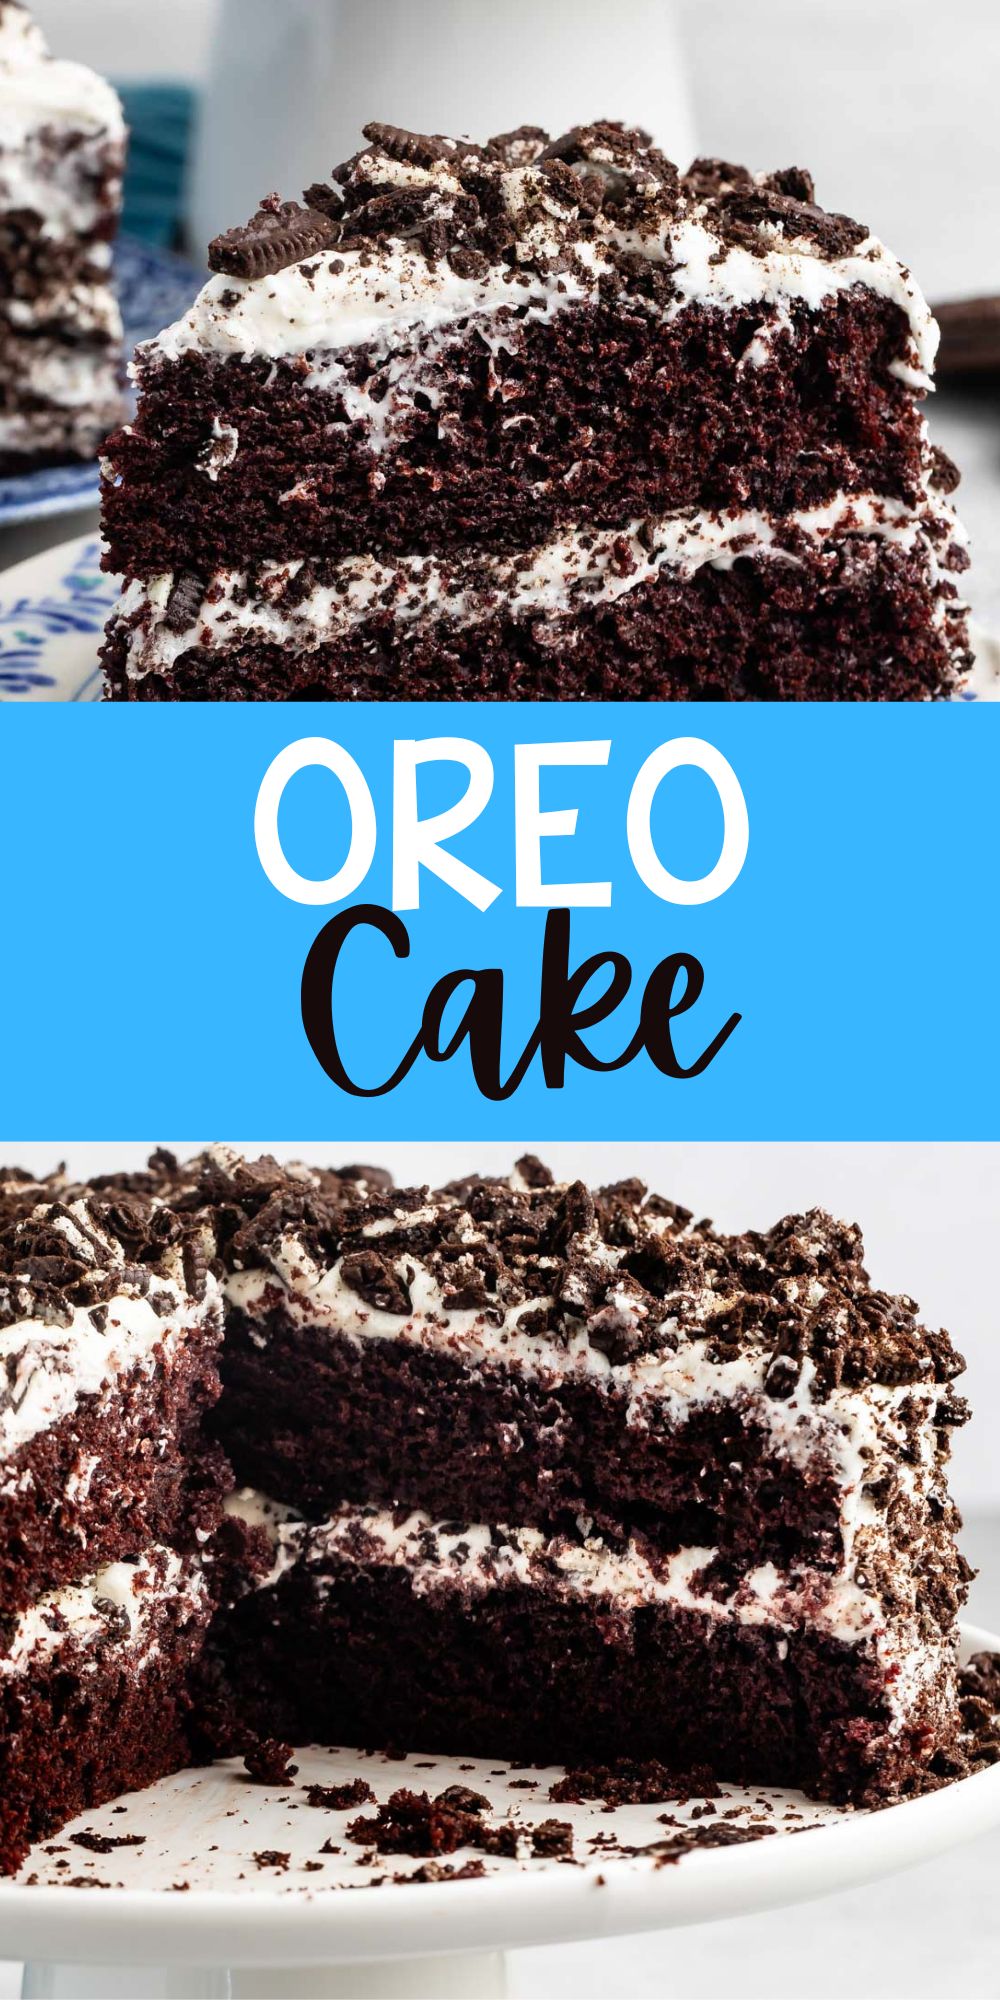 two photos of brown layered cake with white frosting and crushed oreos on top with words on the image.